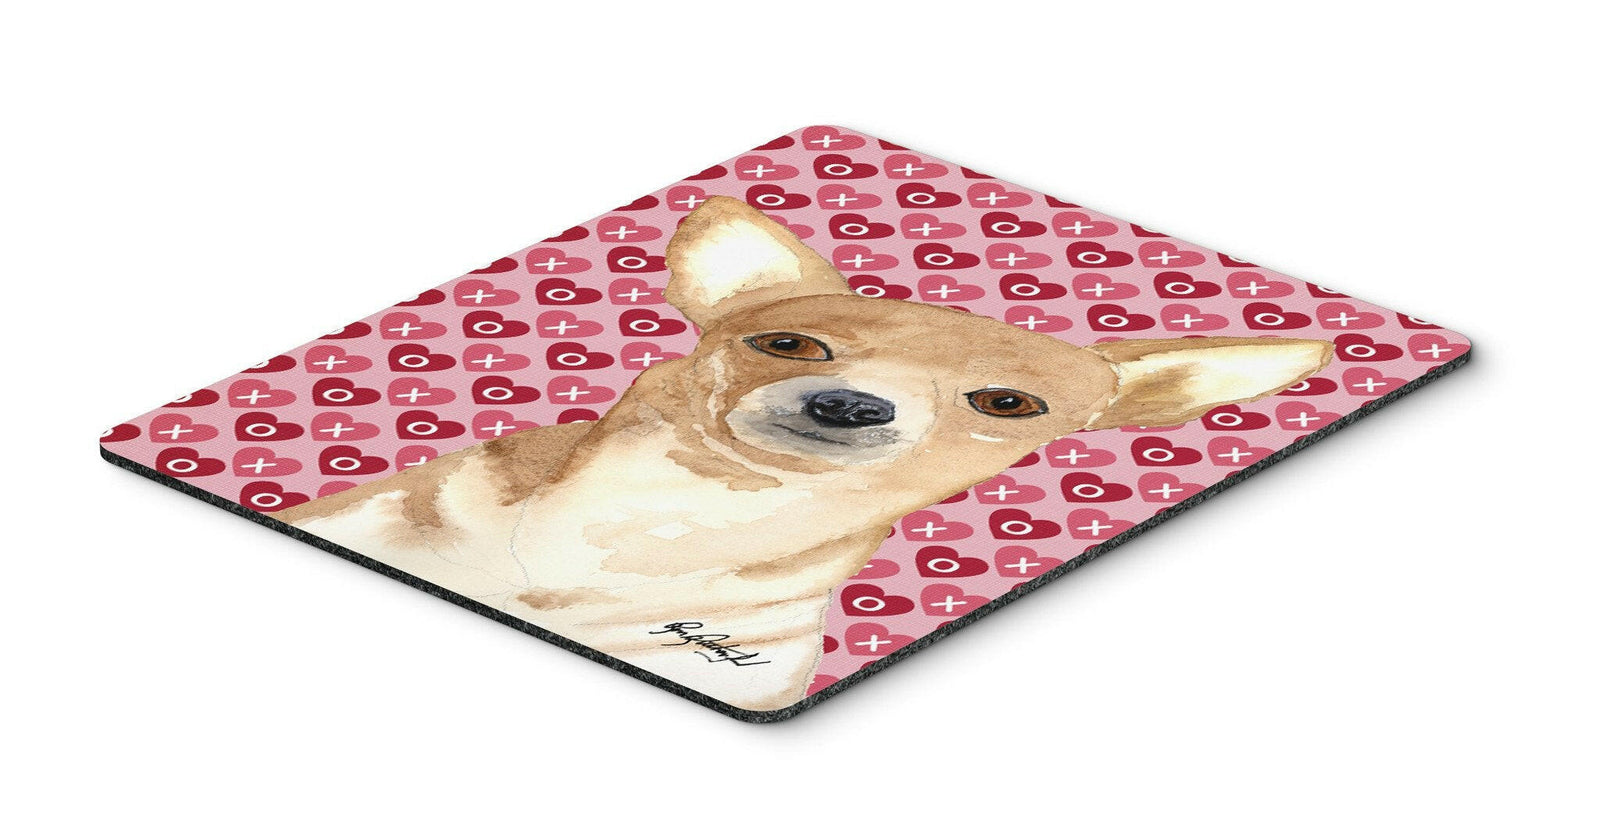 Chihuahua Love and Hearts Mouse Pad, Hot Pad or Trivet by Caroline's Treasures